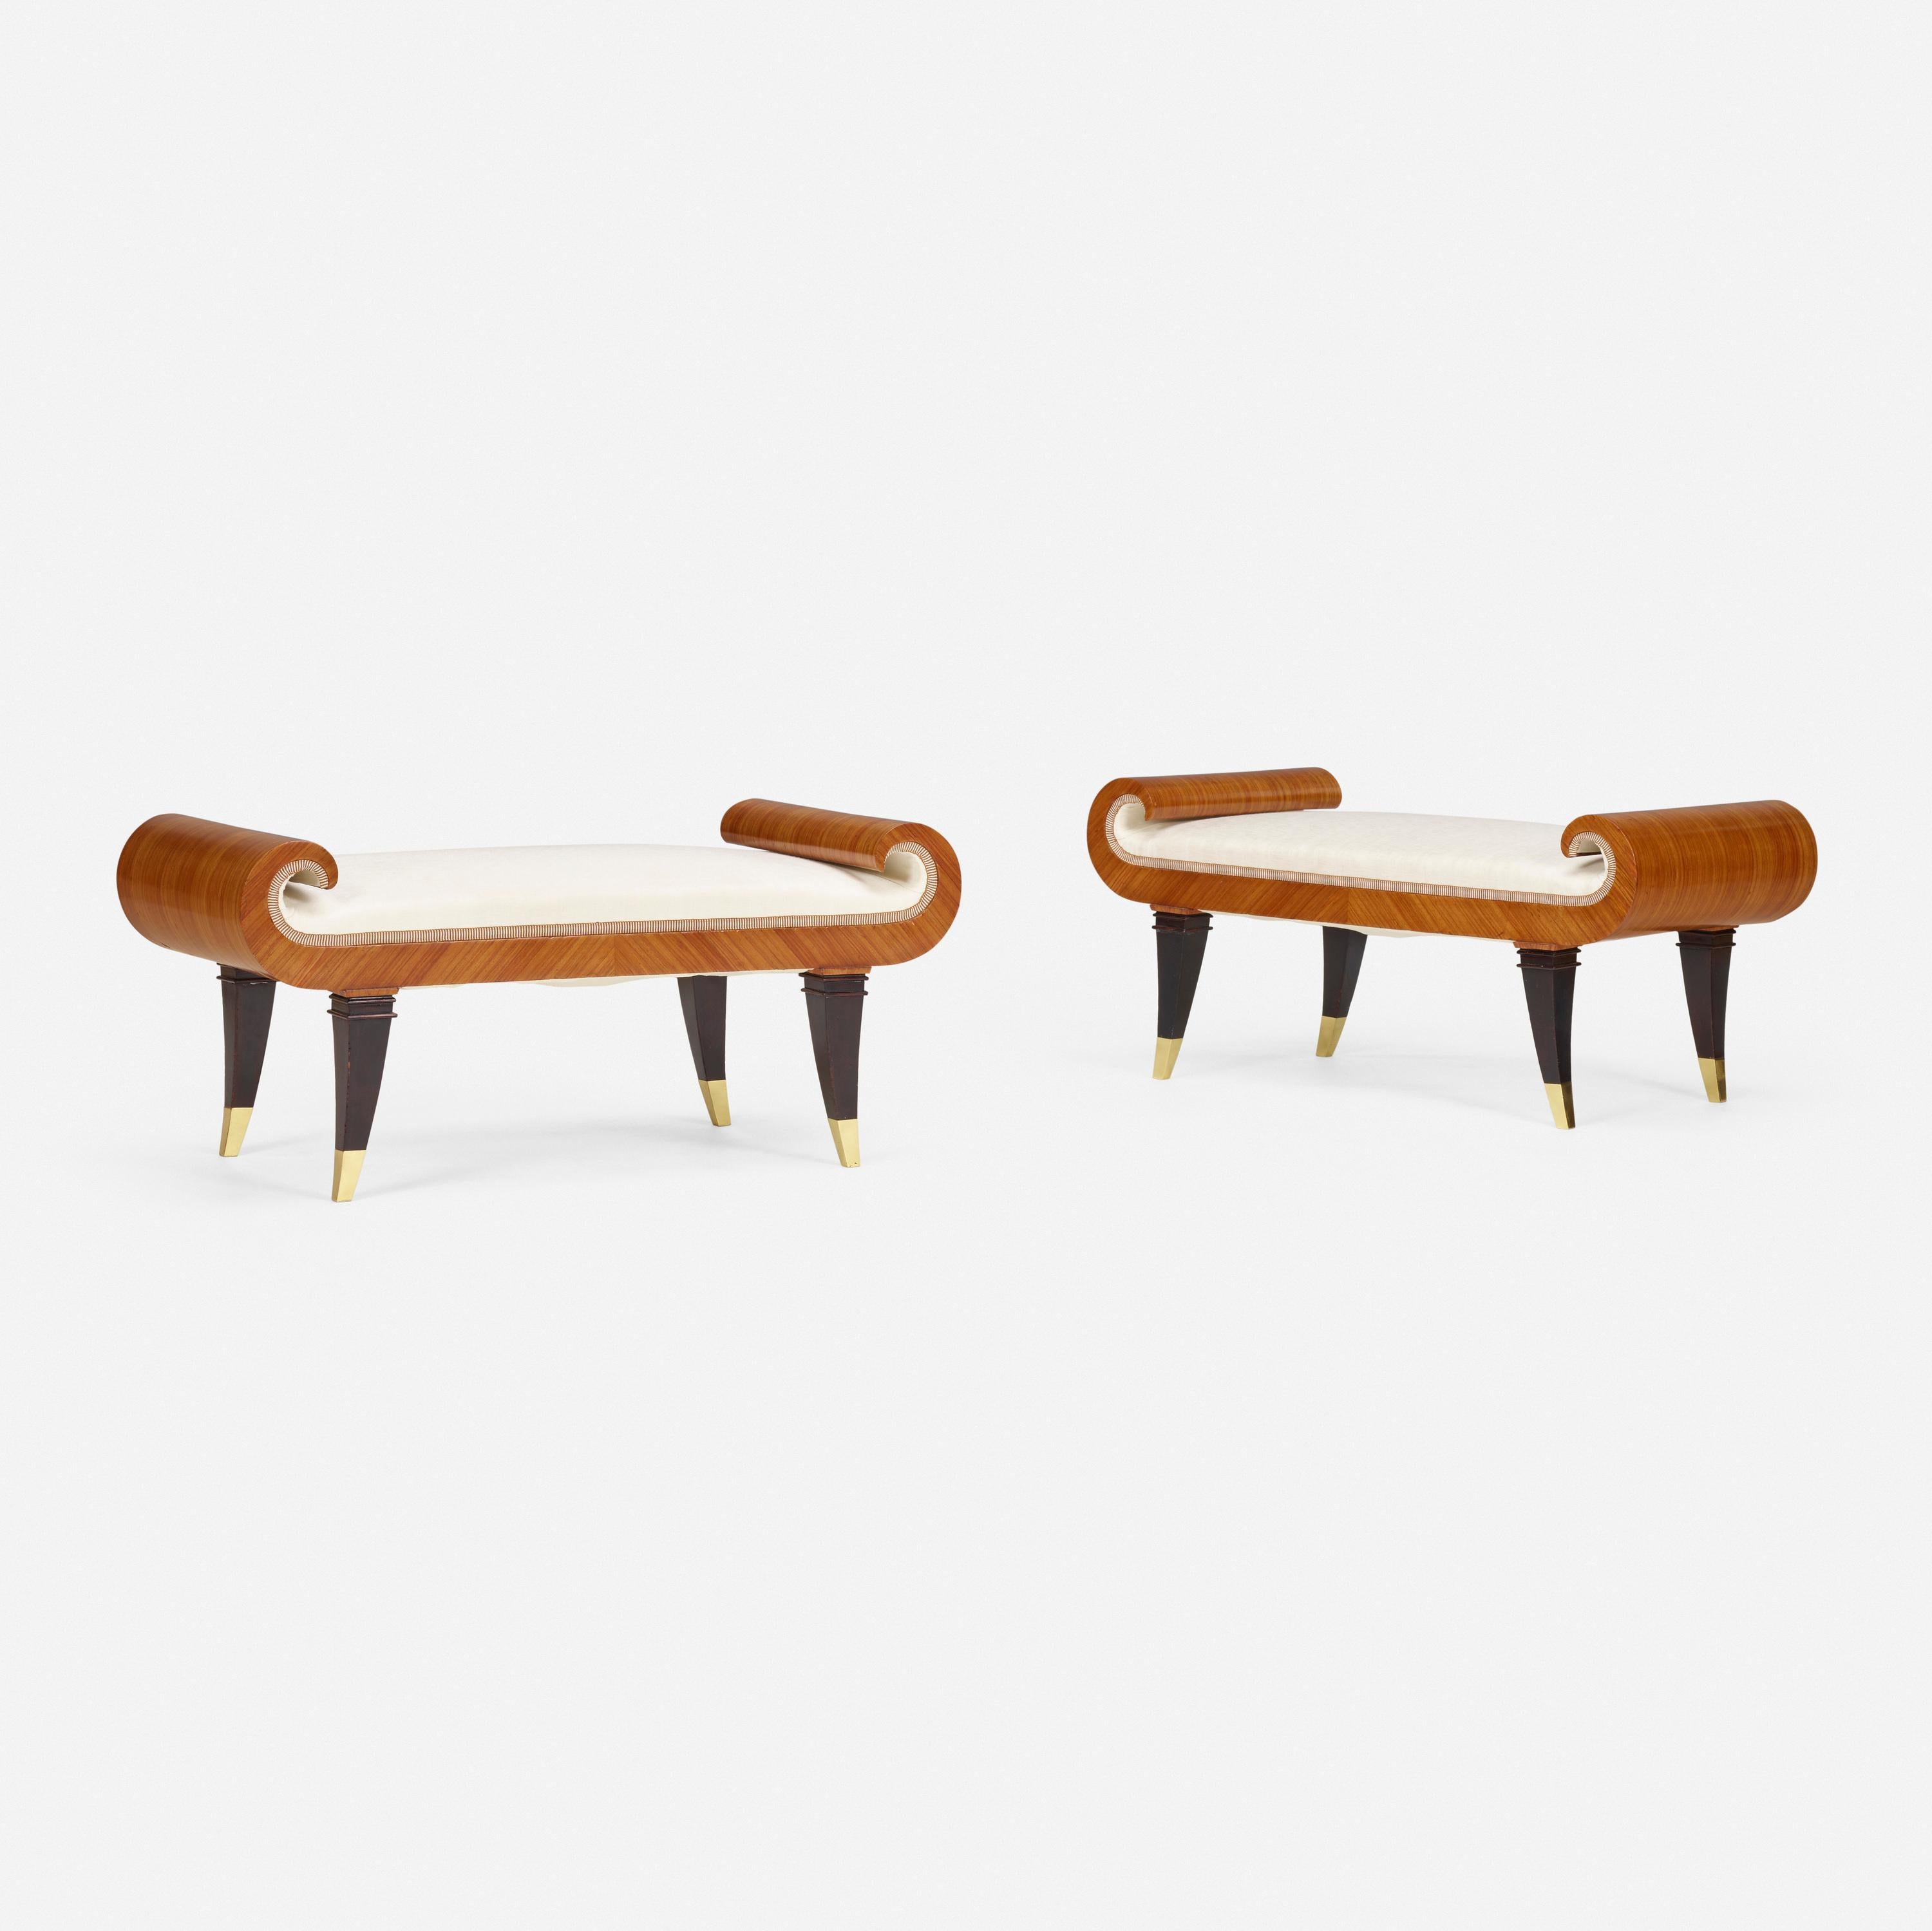 Pair of  veneered and ebonised upholstered stools by Tomaso Buzzi. Of ecxeptionnal proportions and design, these small benches are the perfect example of the Italian modern interpretation of the neoclassical style . Italy: circa 1930 provenance: